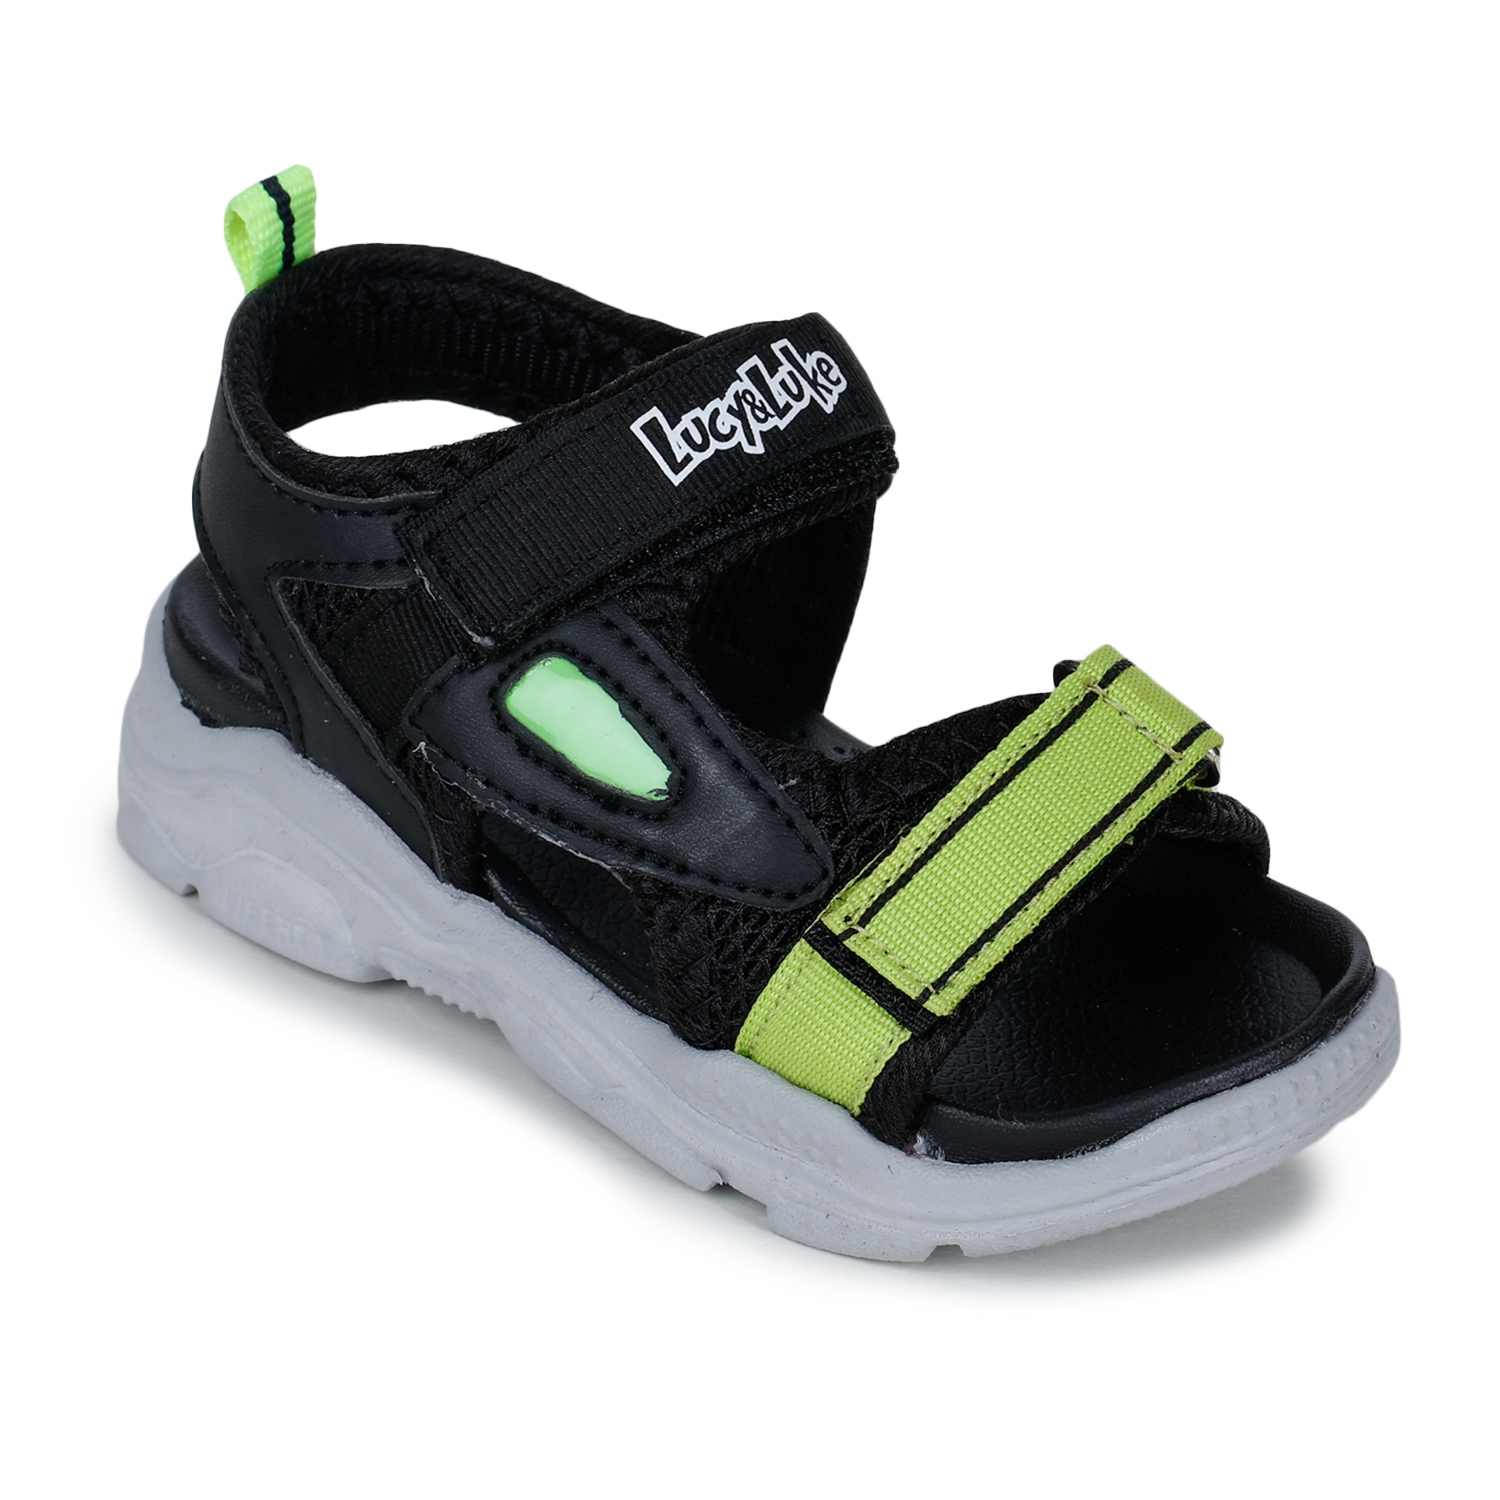 Lucy & Luke by Liberty RICKY-4 Black Sandals for Kids